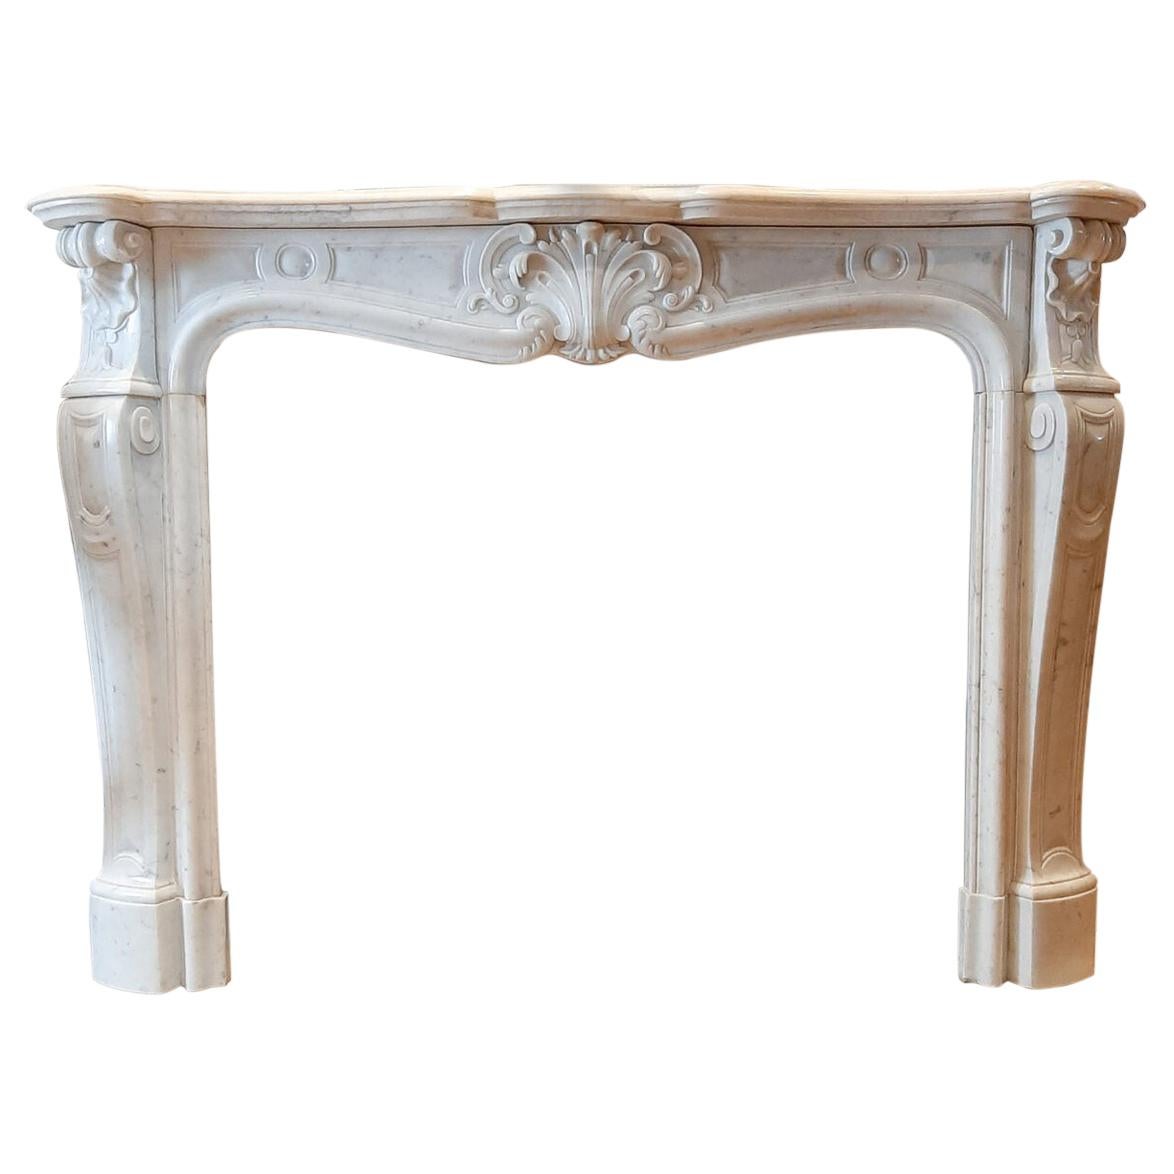 Antique 19th Century White Carrara Marble French Trois Coquilles Fireplace